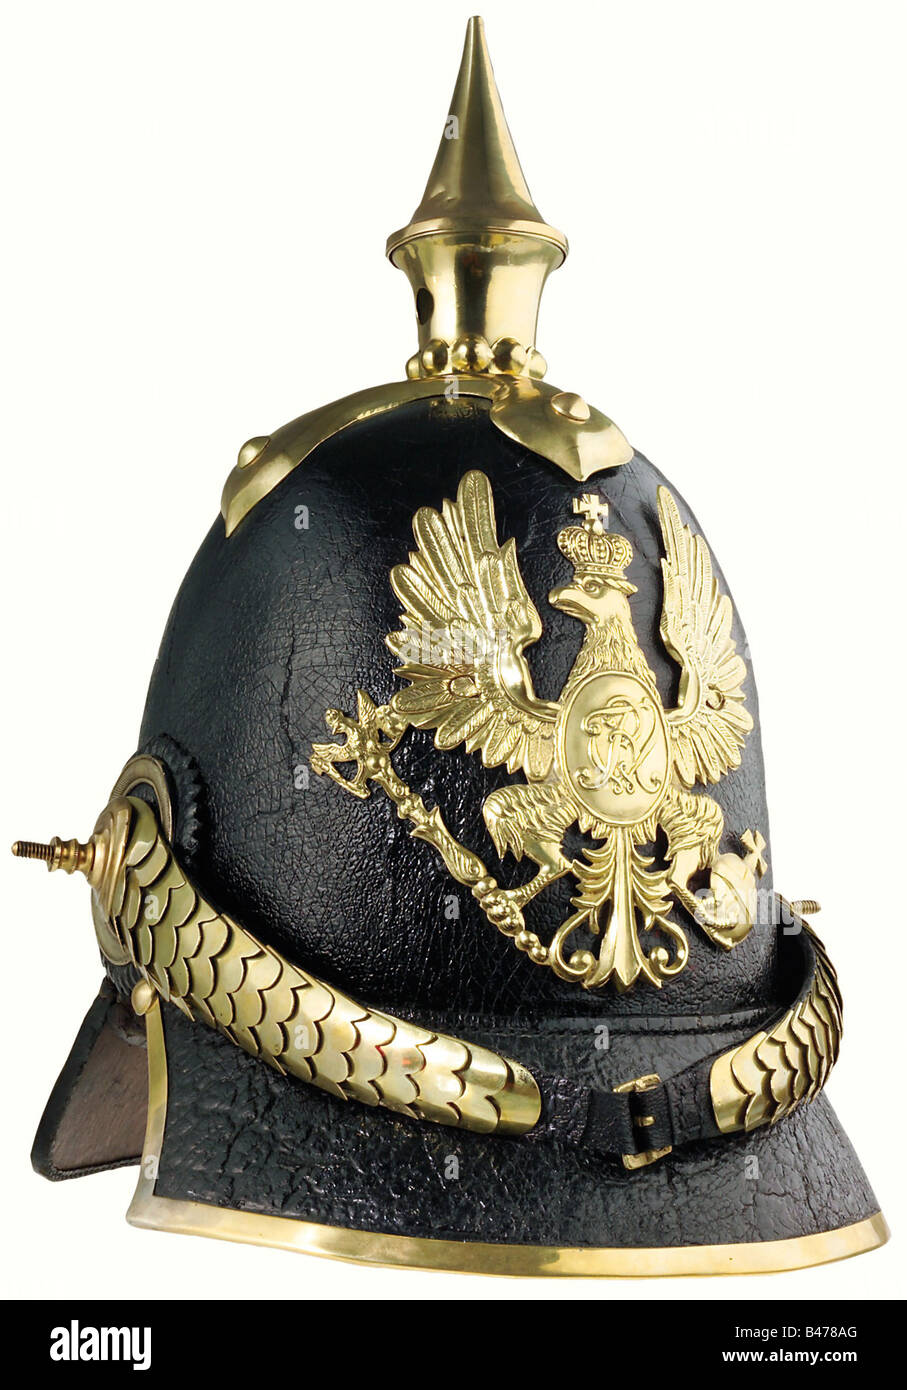 Prussia: A helmet of 1842 pattern for grenadiers., A tall leather skull with a slightly crazed lacquer finish, with mountings of brass. The grenadiers' eagle badge is of the older pattern (two attachment holes were expertly filled in sometime during its active service). Cambered chinscales, secured to an officers' pattern cockade on the right side. The attachment posts are incorrect replacements. The black leather liner shows signs of ageing, but has been expertly restored. Size 56 1/2. A very well preserved helmet of eminent importance for German military hist, Stock Photo